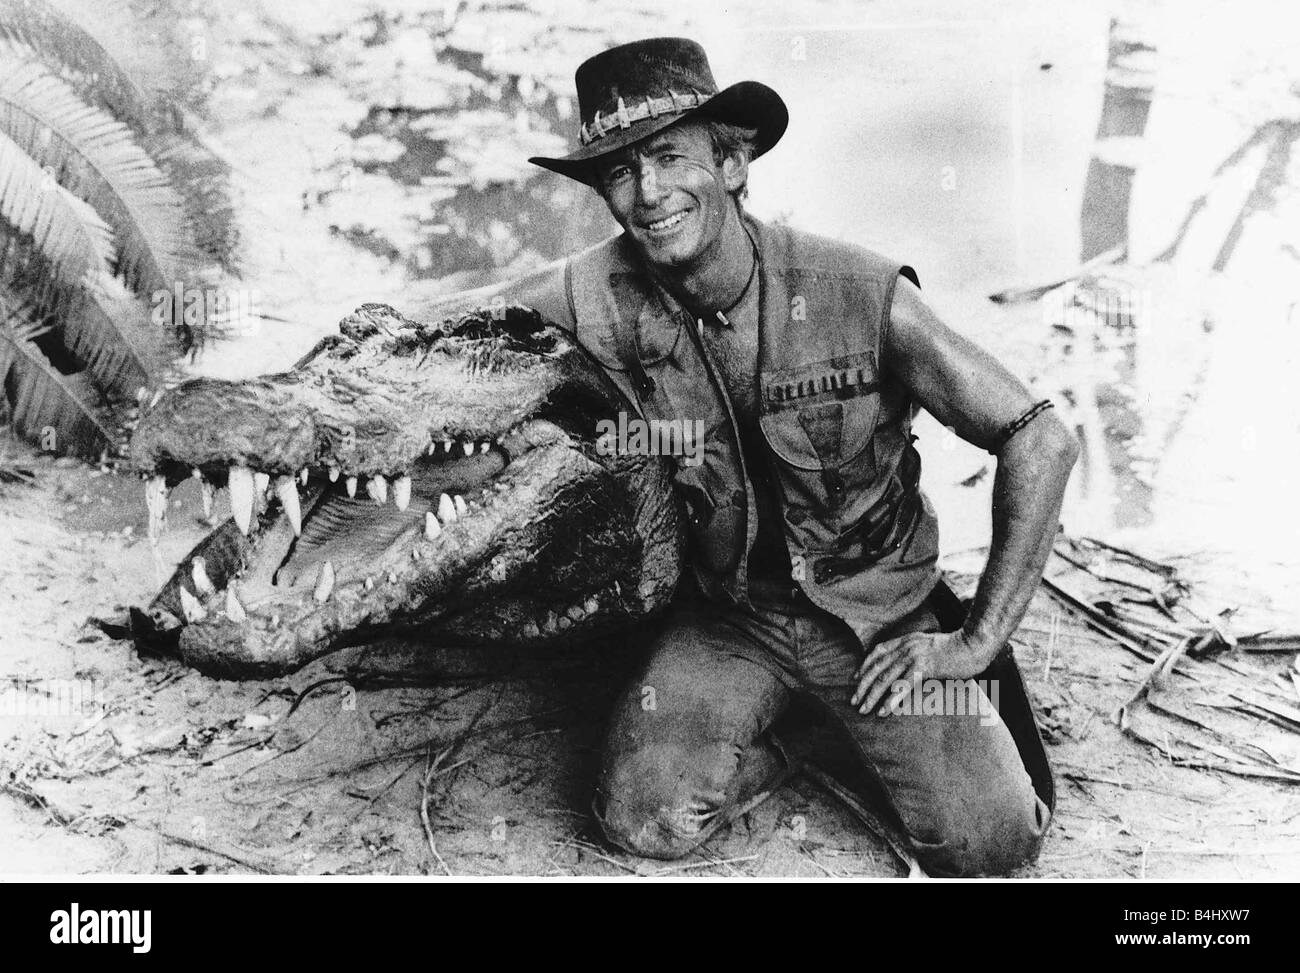 Crocodile dundee Black and White Stock Photos & Images - Alamy